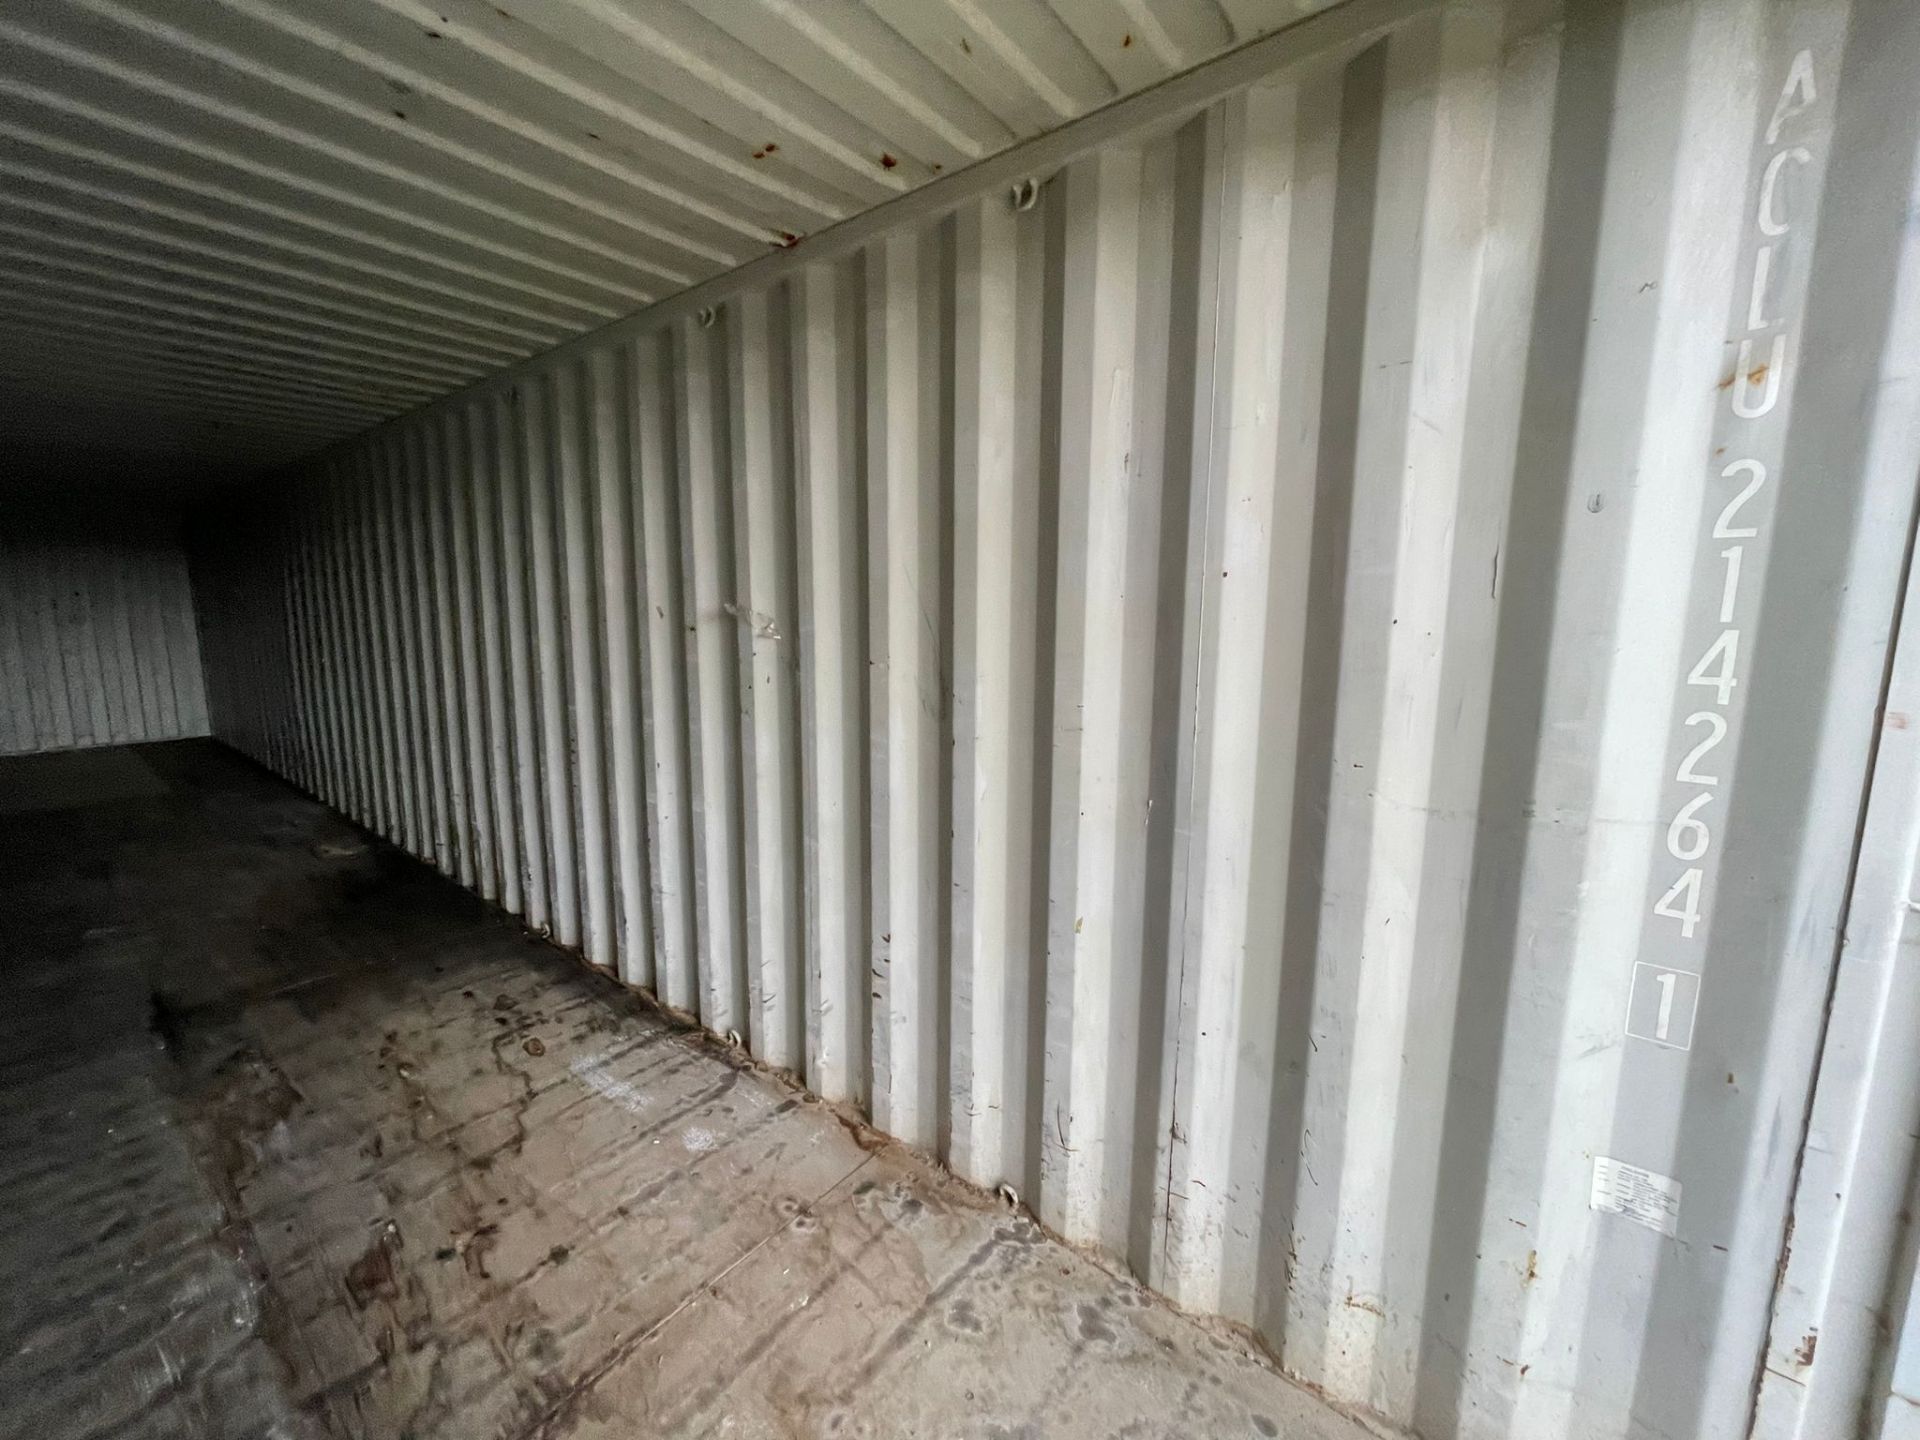 Shipping Container - ref ACLU2142641 - NO RESERVE (40’ GP - Standard) - Image 2 of 4